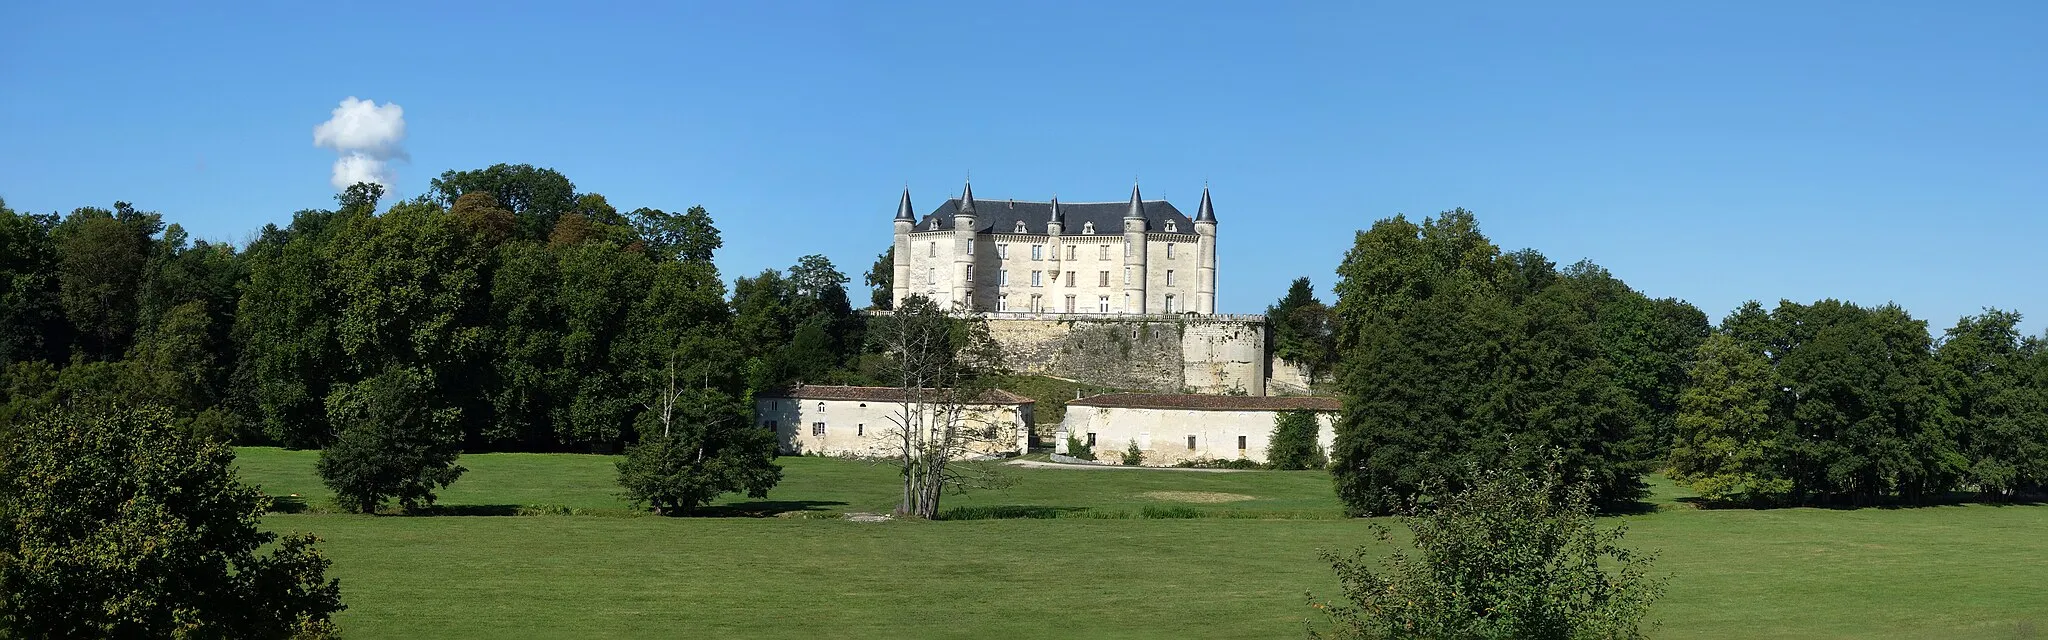 Photo showing: A view of the castle of Rochandry near Mouthiers sur Boëme (Charente - France - 2015, September)